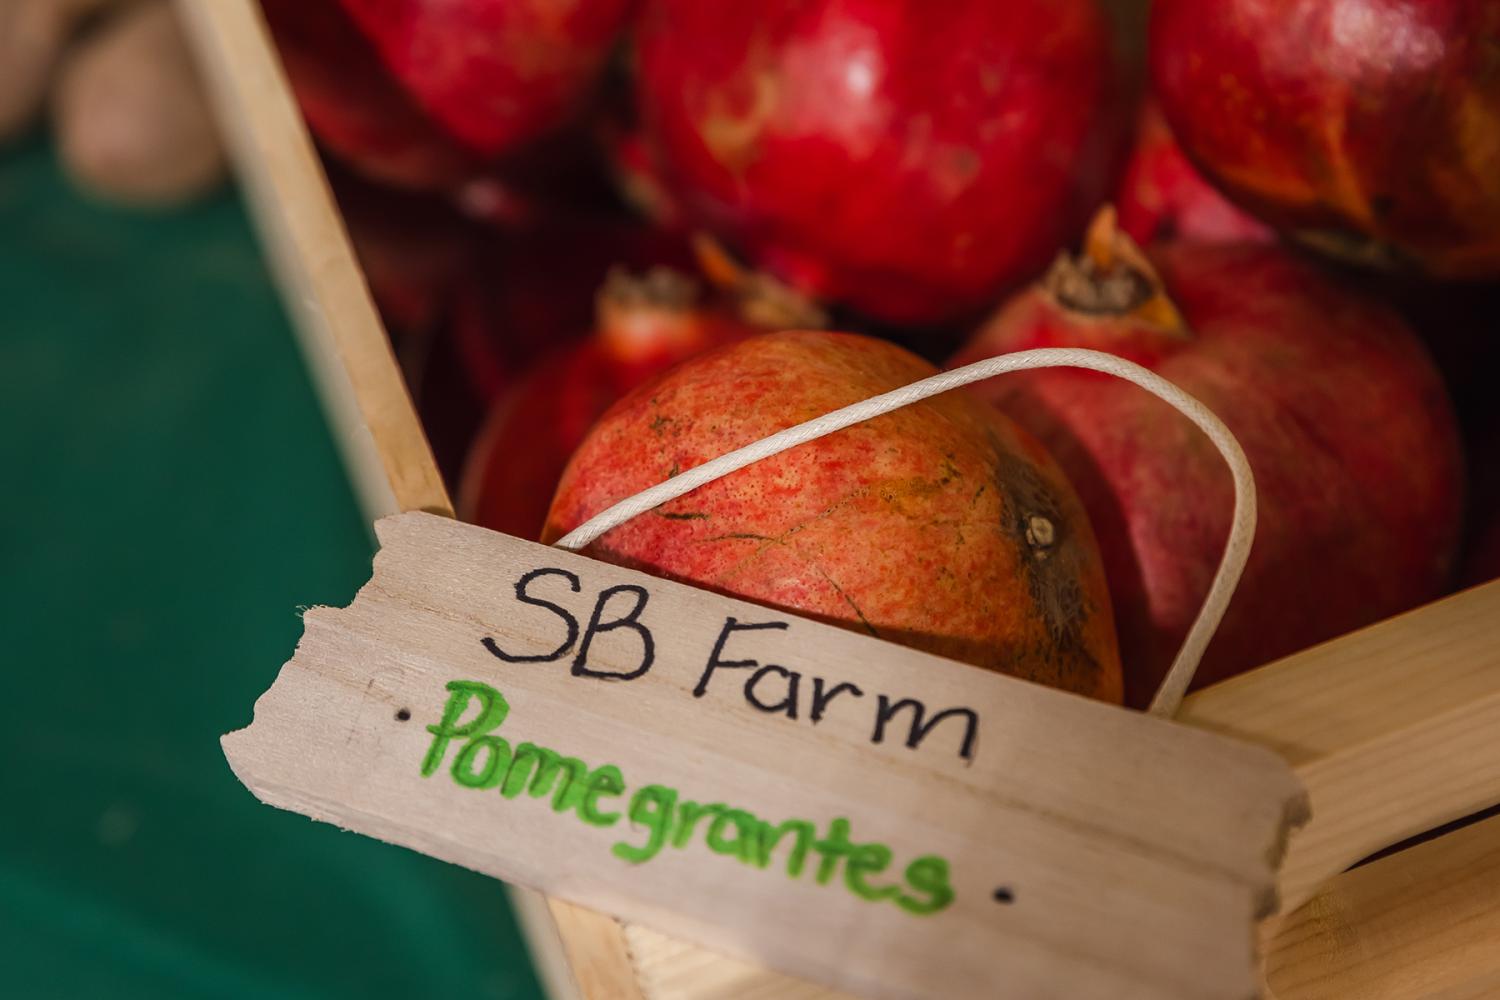 Pomegrantes in wooden bin with small wooden sign reading "SB Farms - Pomegrantes"